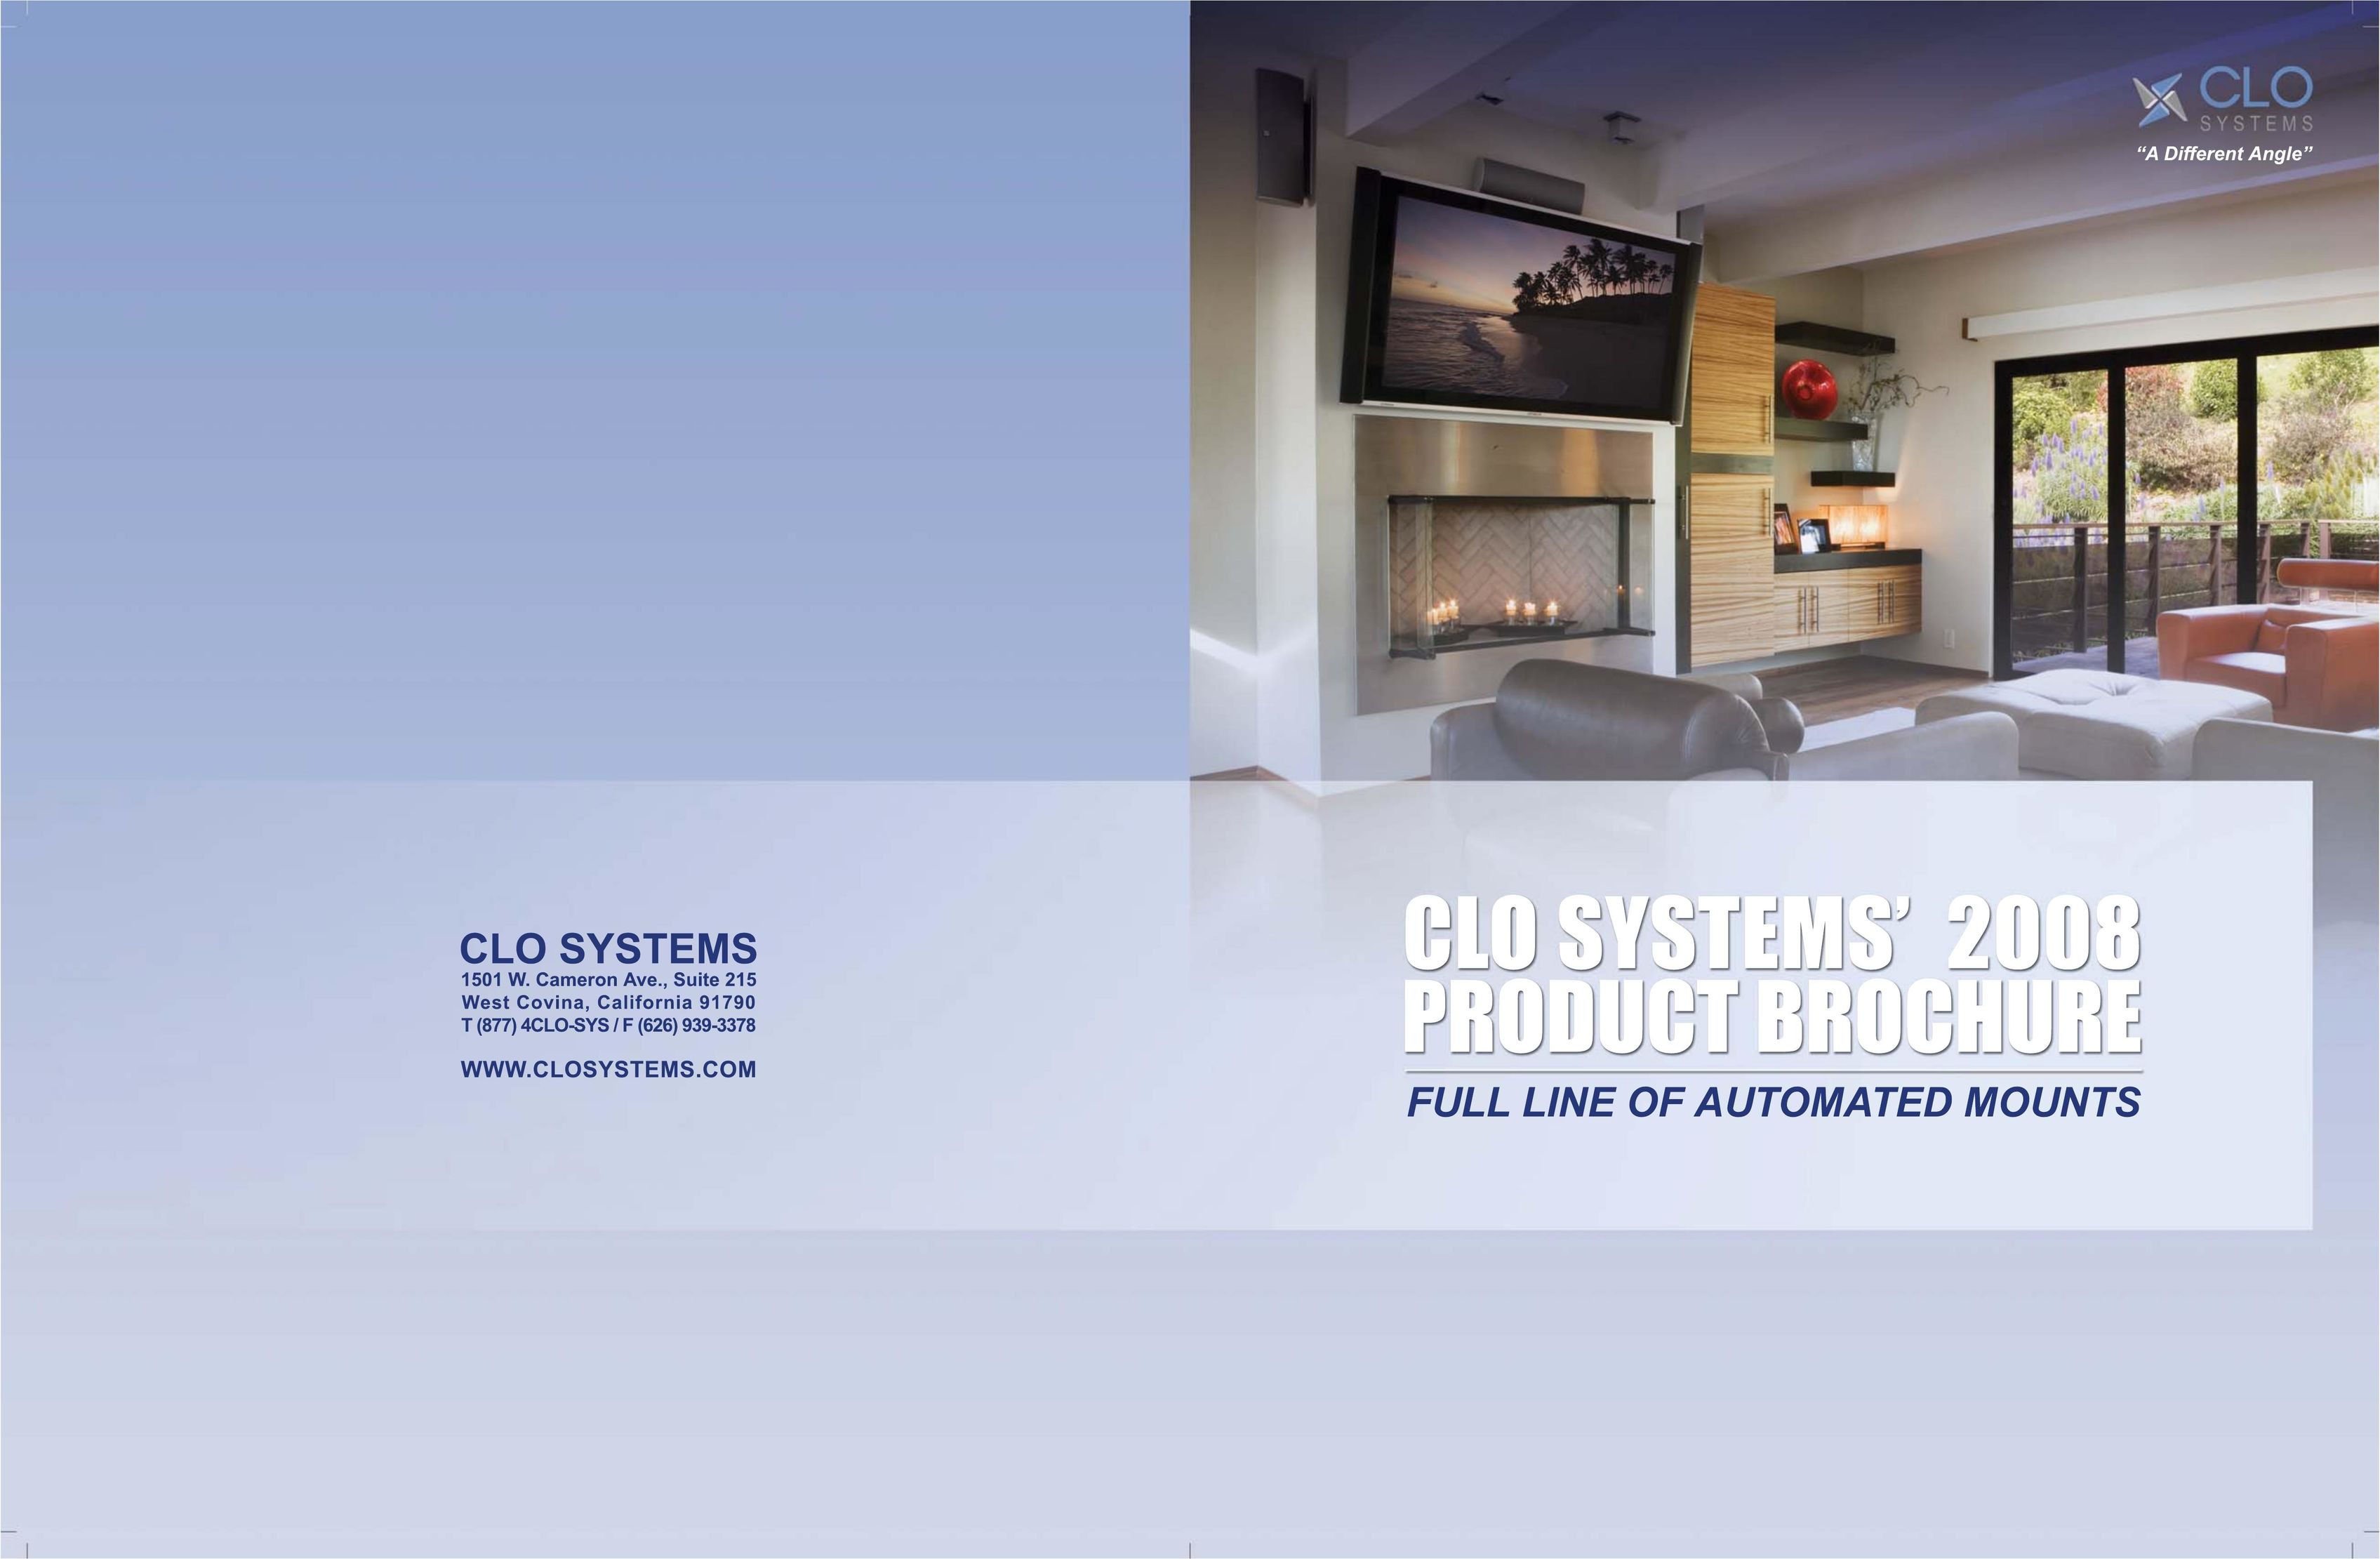 CLO Systems Full Line of Automated Mounts Indoor Furnishings User Manual